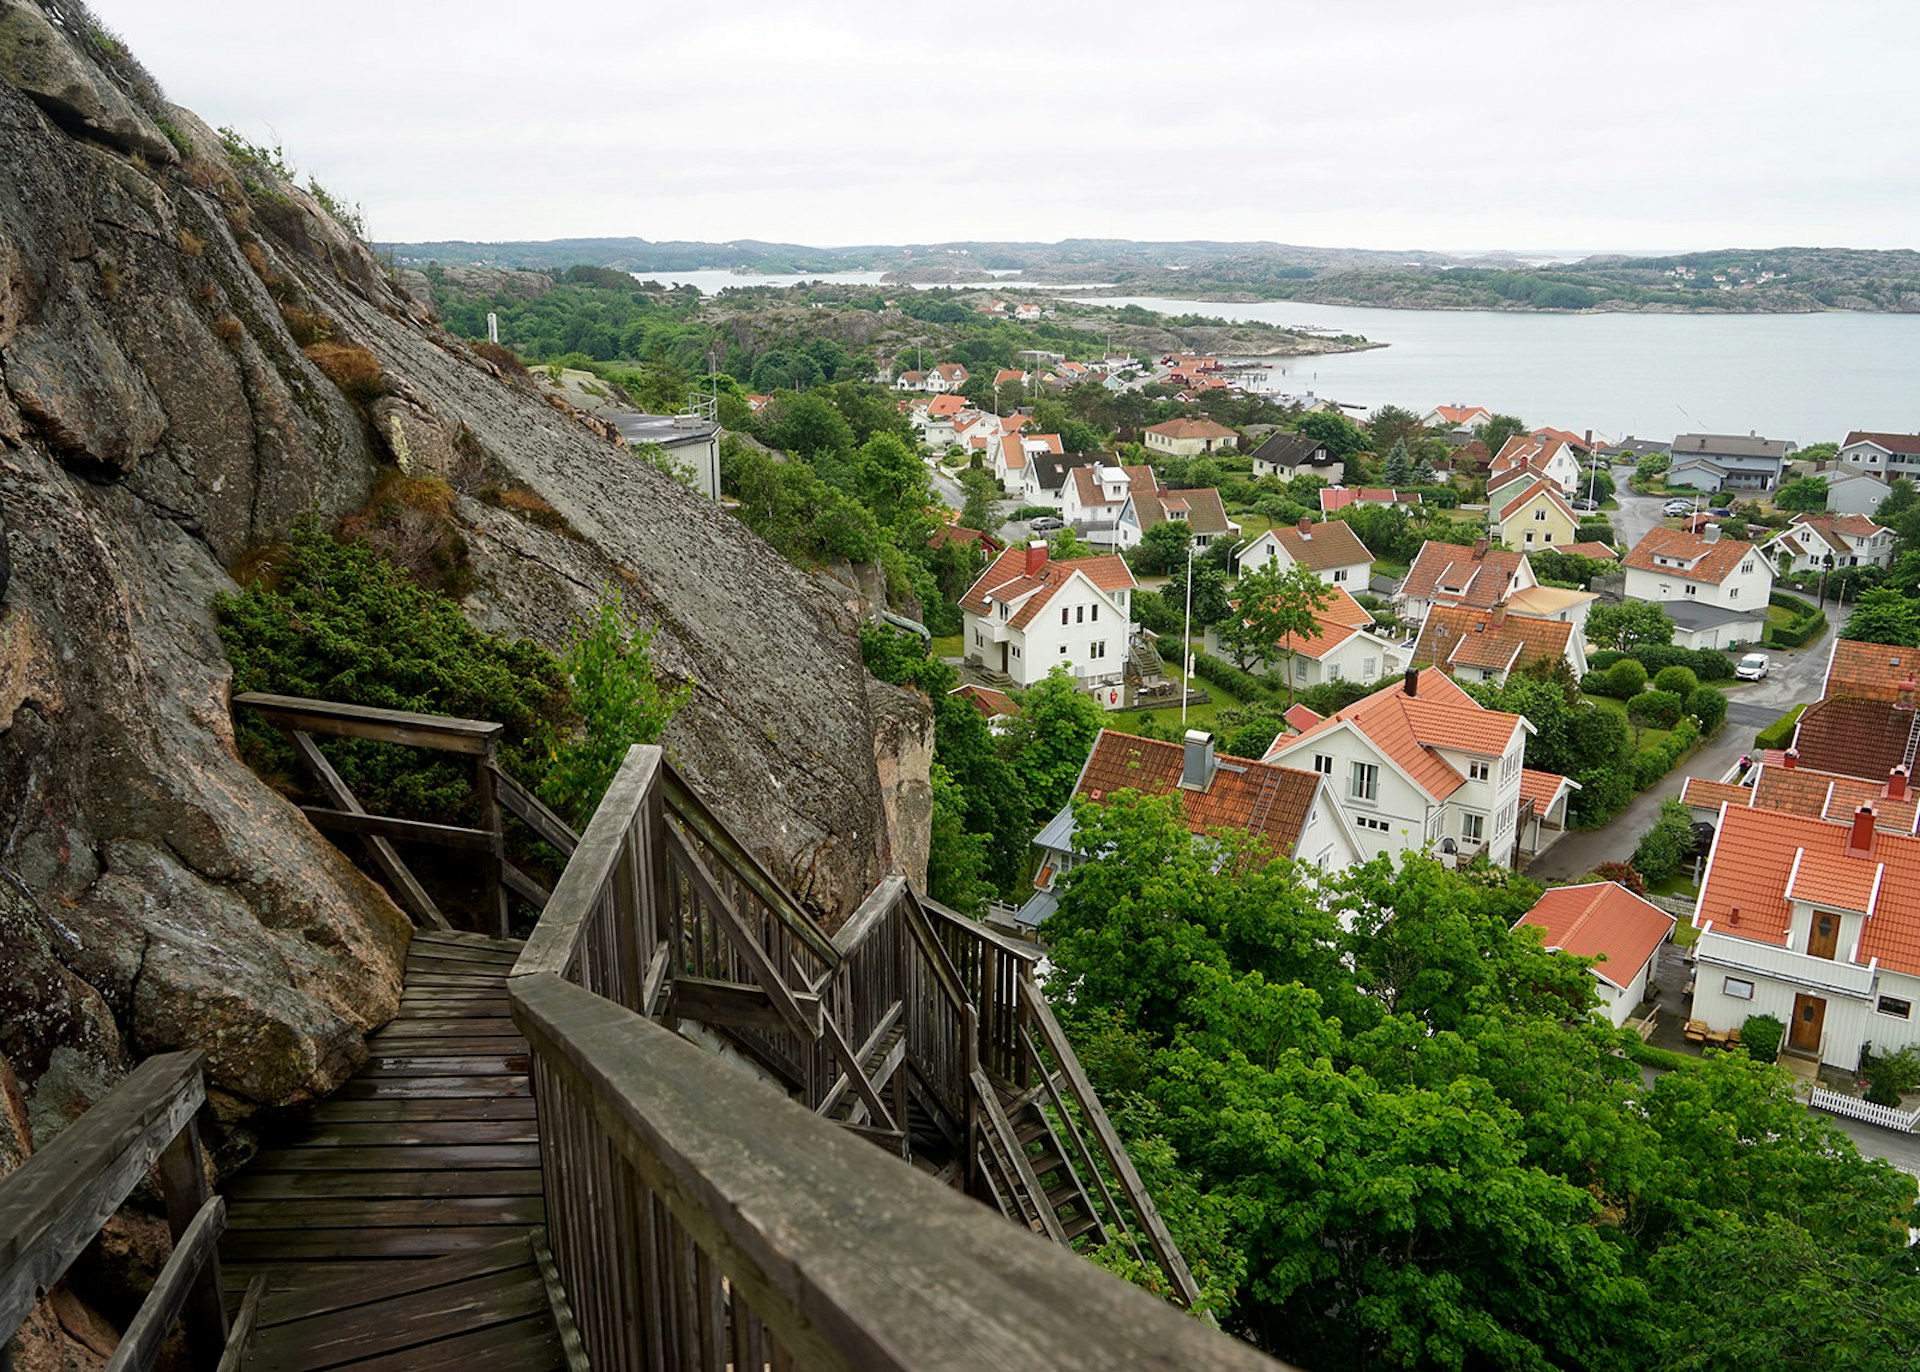 A view of Fjällbacka from the wooden stairs leading up to the top of the Vetteberget, Bohuslän Coast © James Kay / Lonely Planet